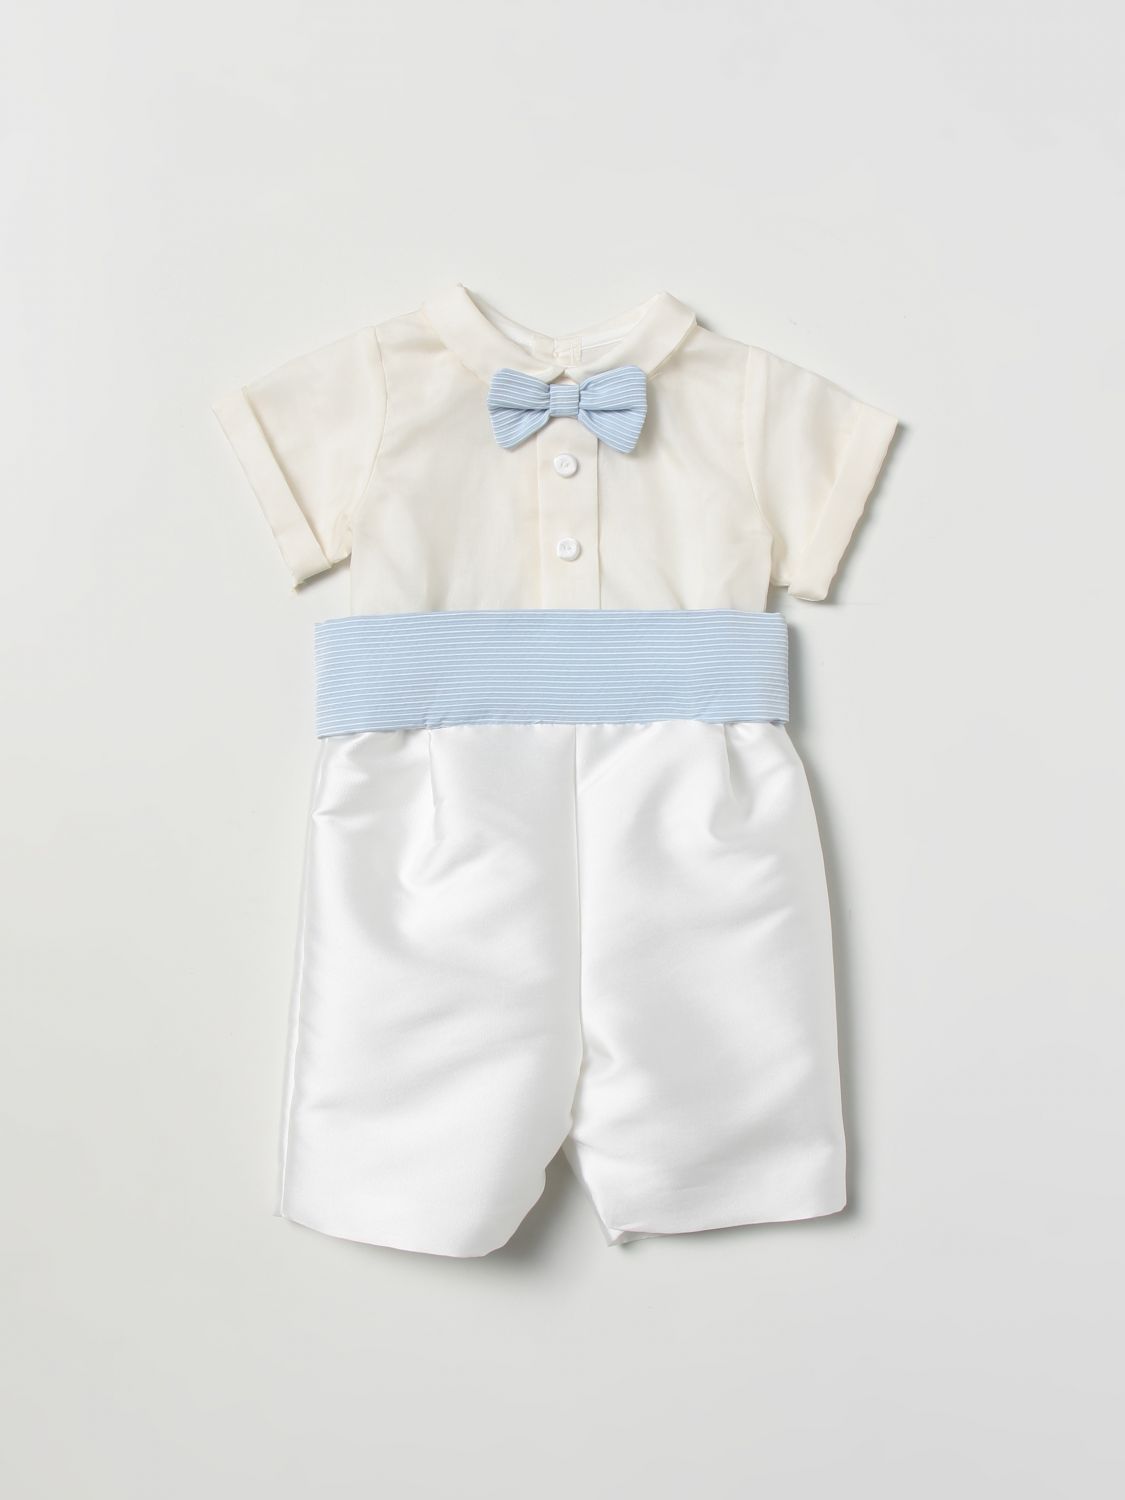 La Stupenderia Babies' Dungaree  Kinder Farbe Weiss In White